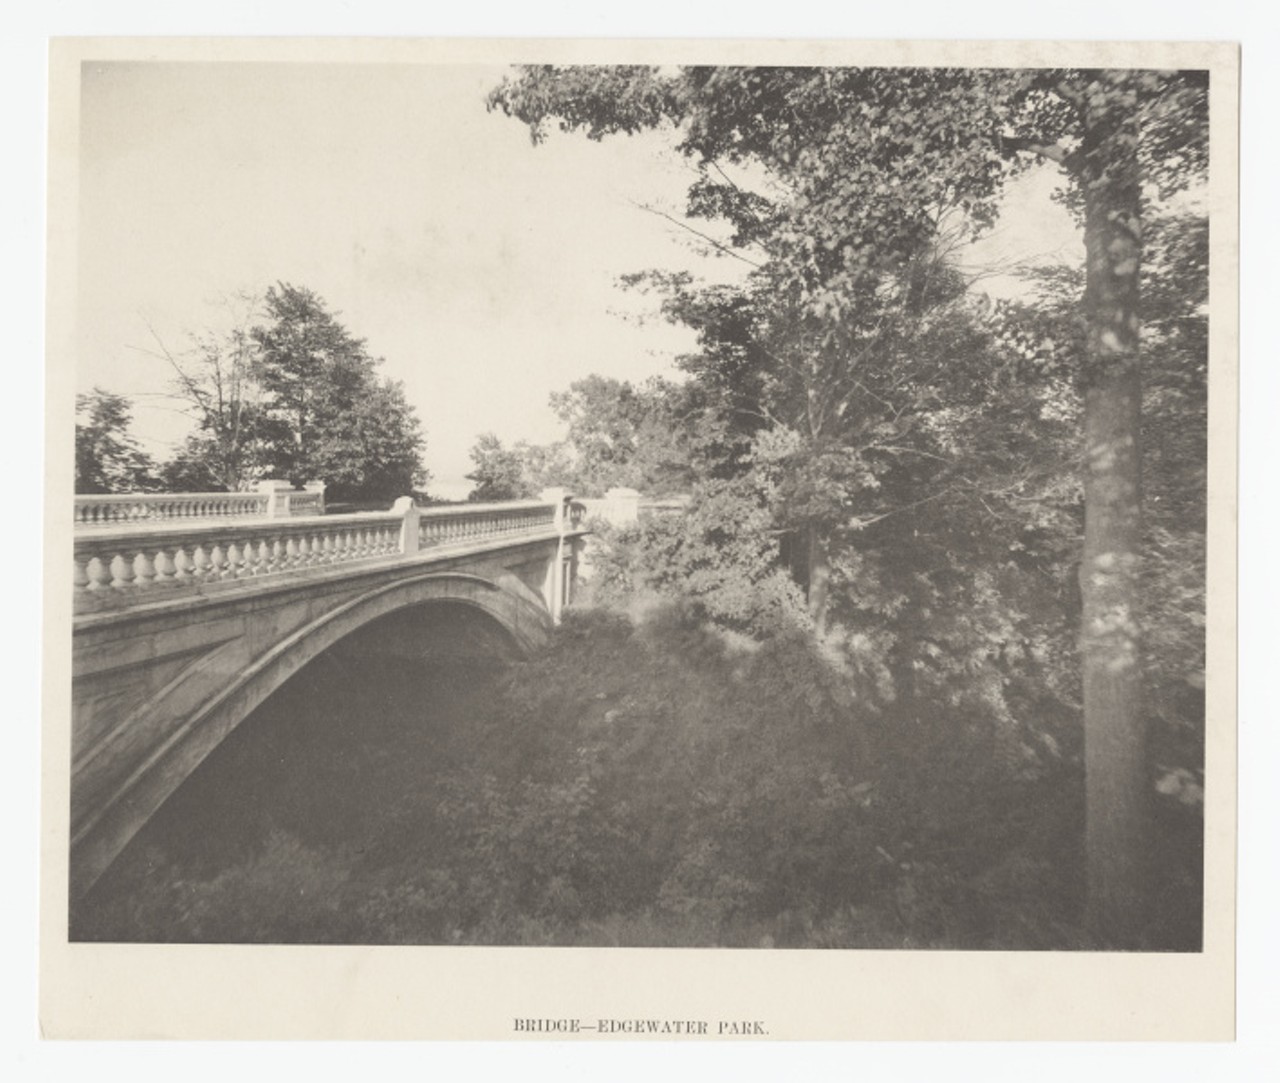 Side profile of a bridge over a ravine in Edgewater Park. This picture was published in "Art Work of Cleveland" (Chicago: Gravure Illustration Co., 1911), leaf 6.